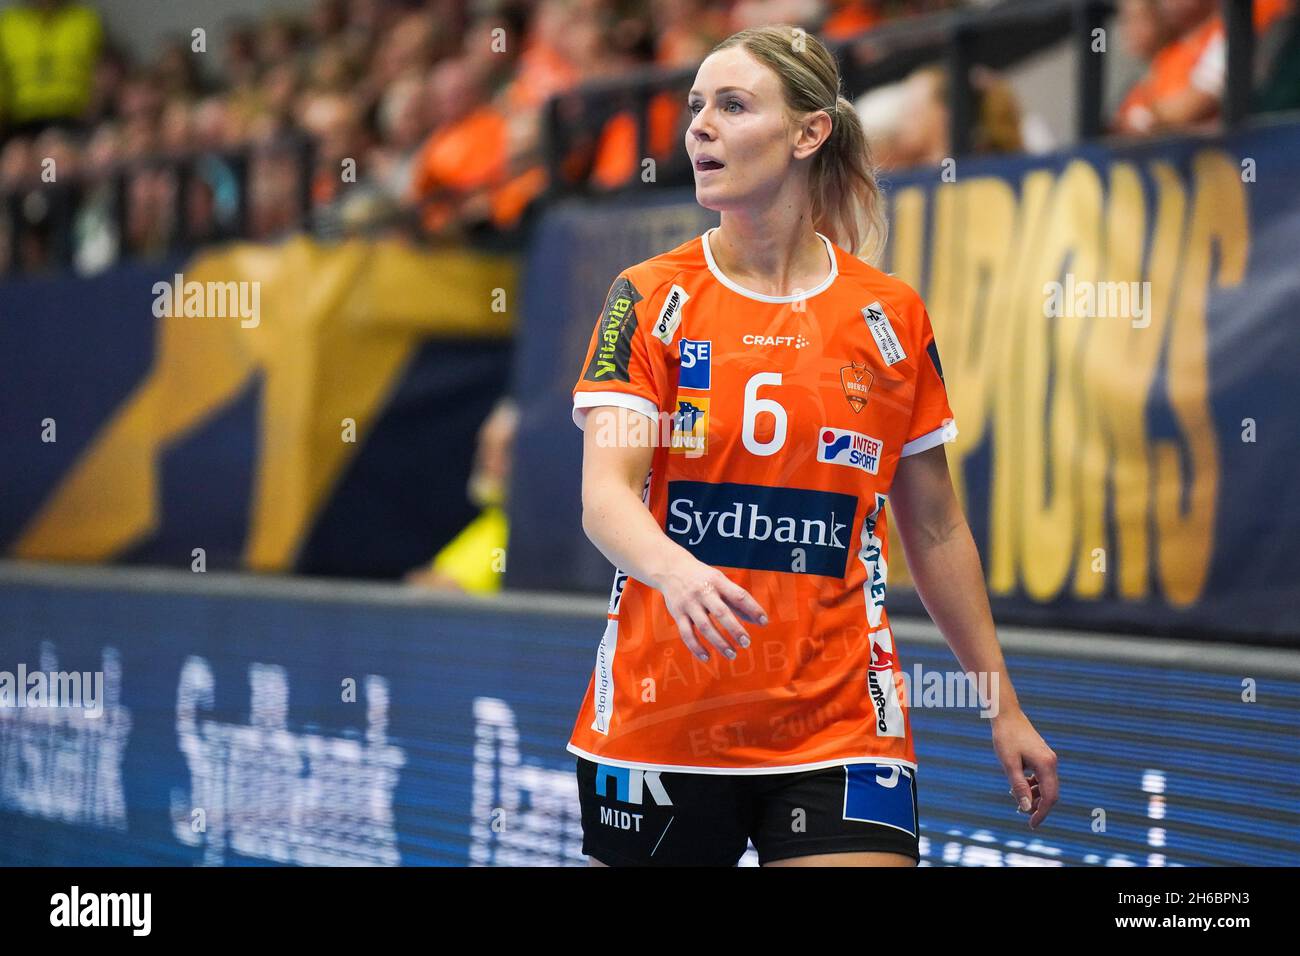 Odense, Denmark. 14th Nov, 2021. Freja Cohrt (6) of Odense Handball seen in  the DELO EHF Champions League match between Odense Handball and Vipers  Kristiansand at Sydbank Arena in Odense. (Photo Credit: